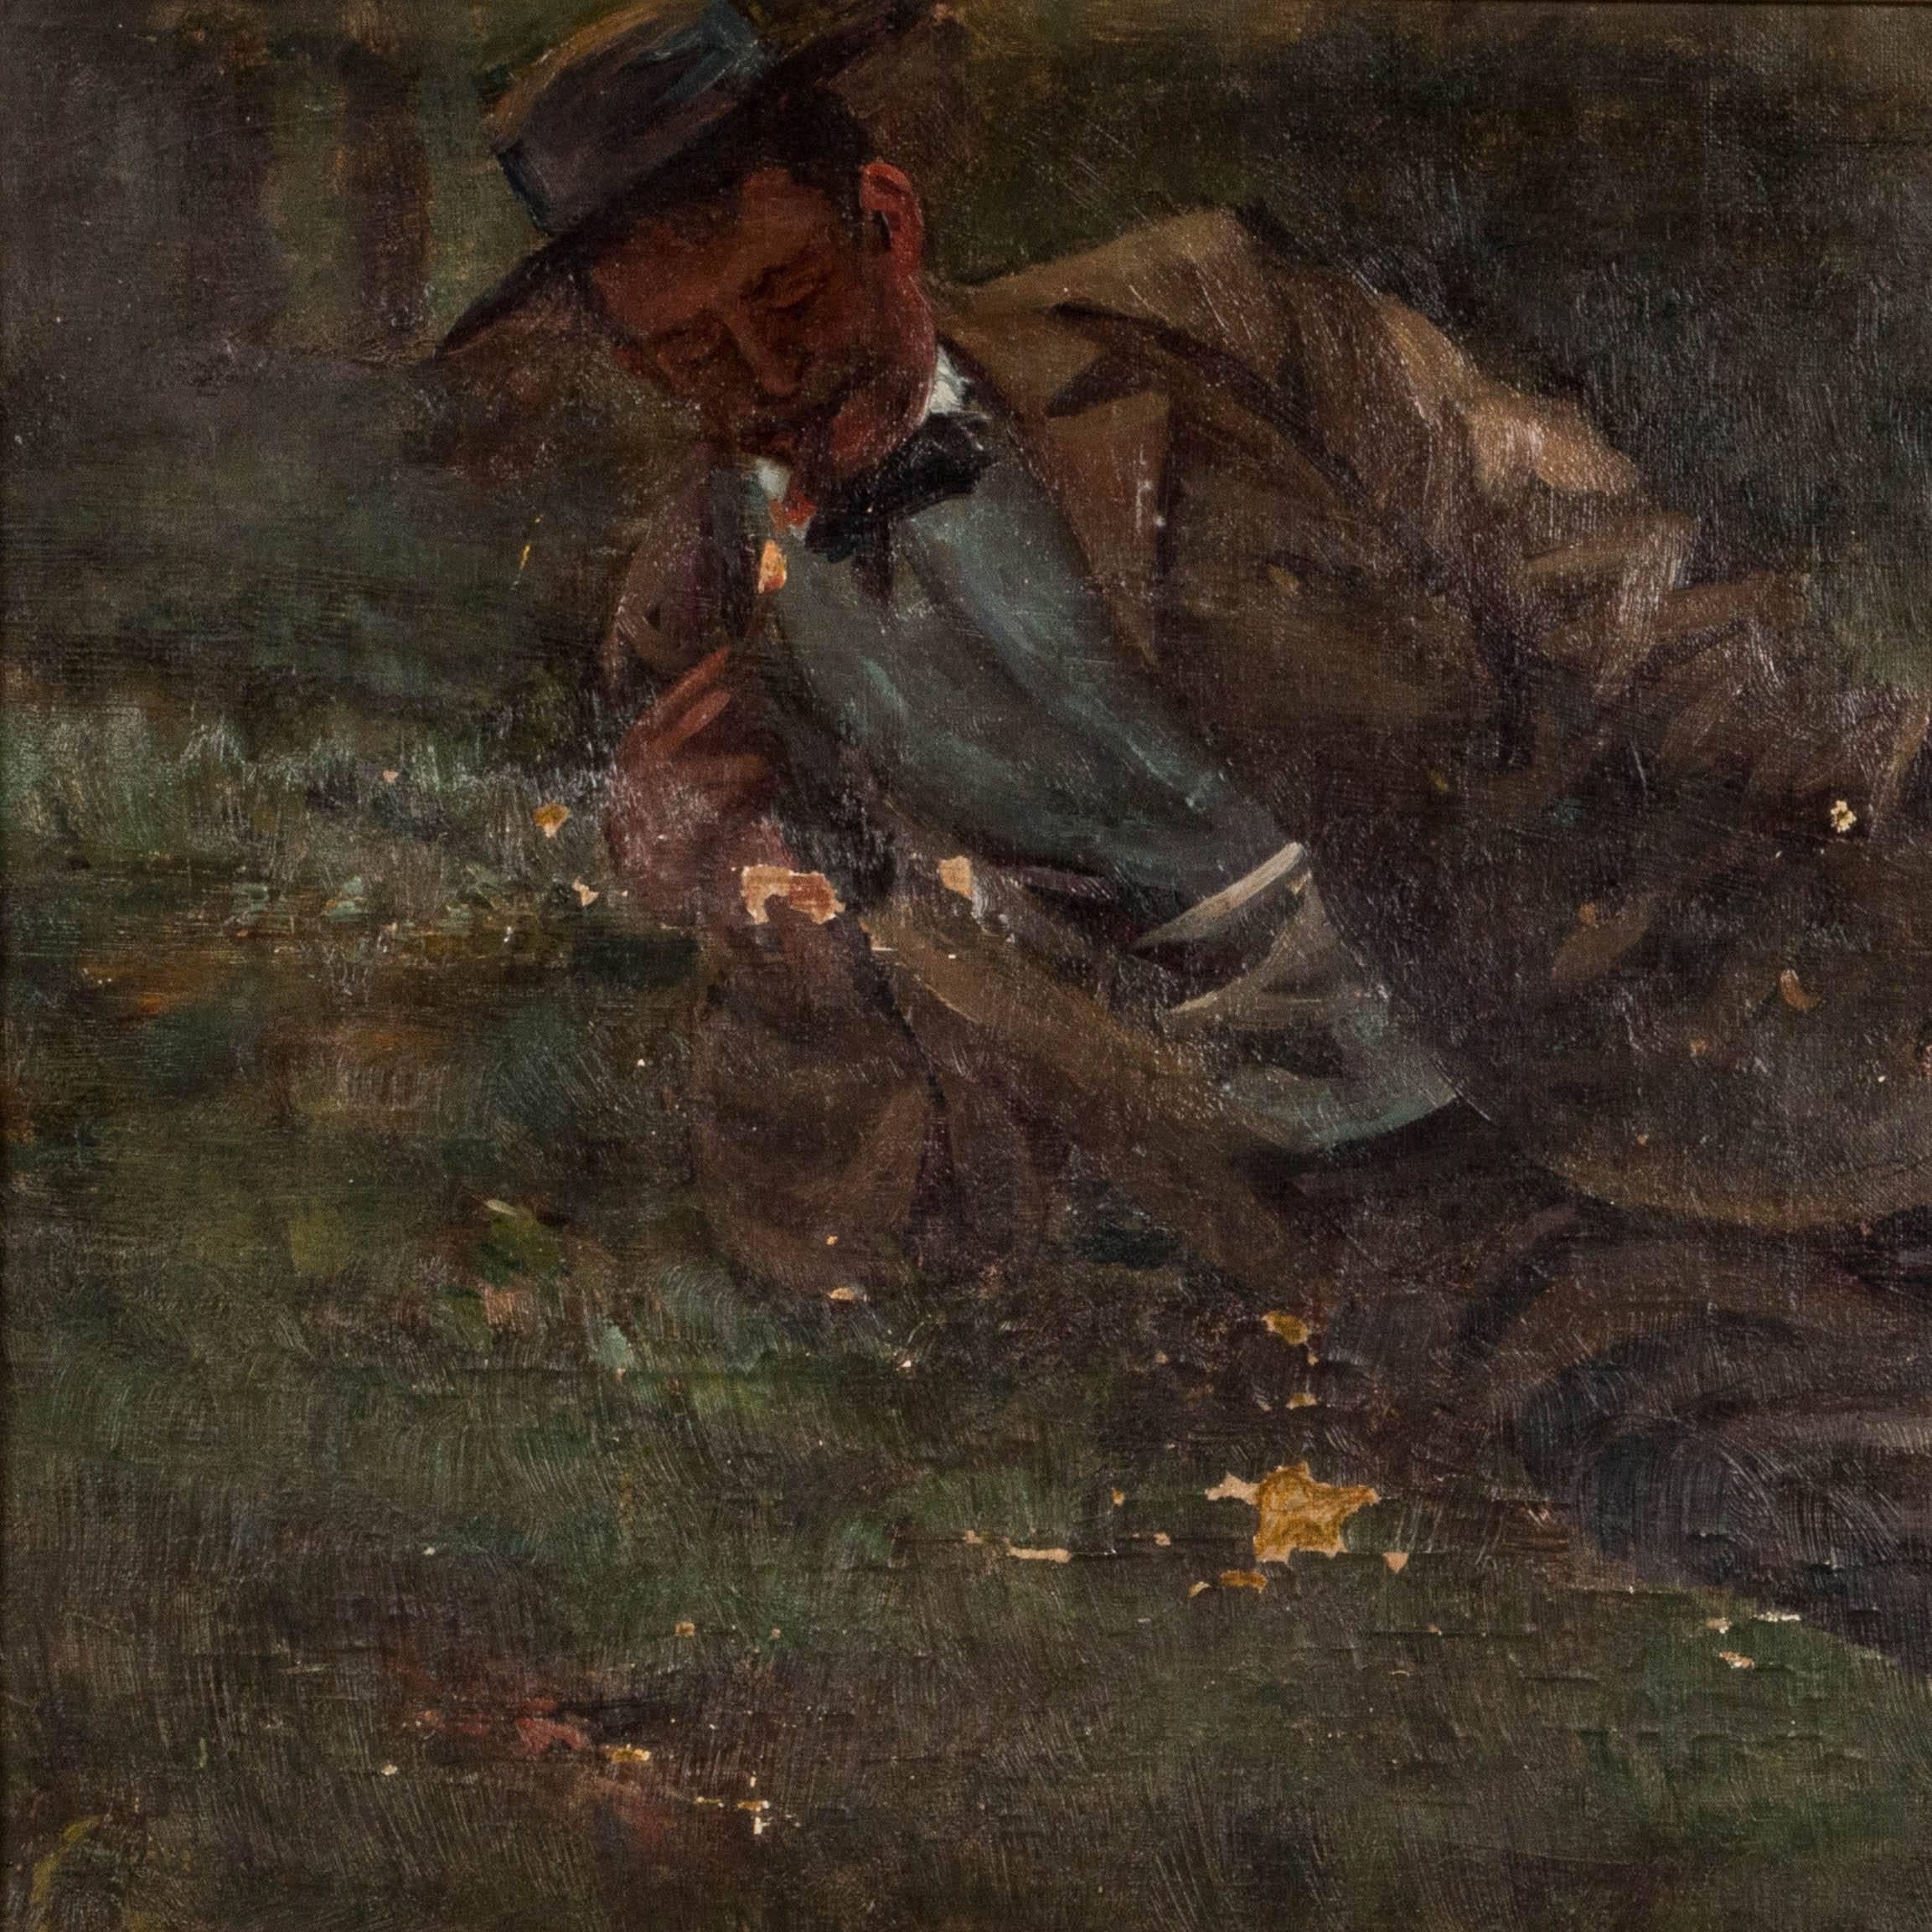 Original oil painting of a Victorian gentleman holding a box of matches and lighting his cigar while reclining in a forest setting. There are areas of age related paint loss scattered across the canvas. The painting is mounted in a gold painted